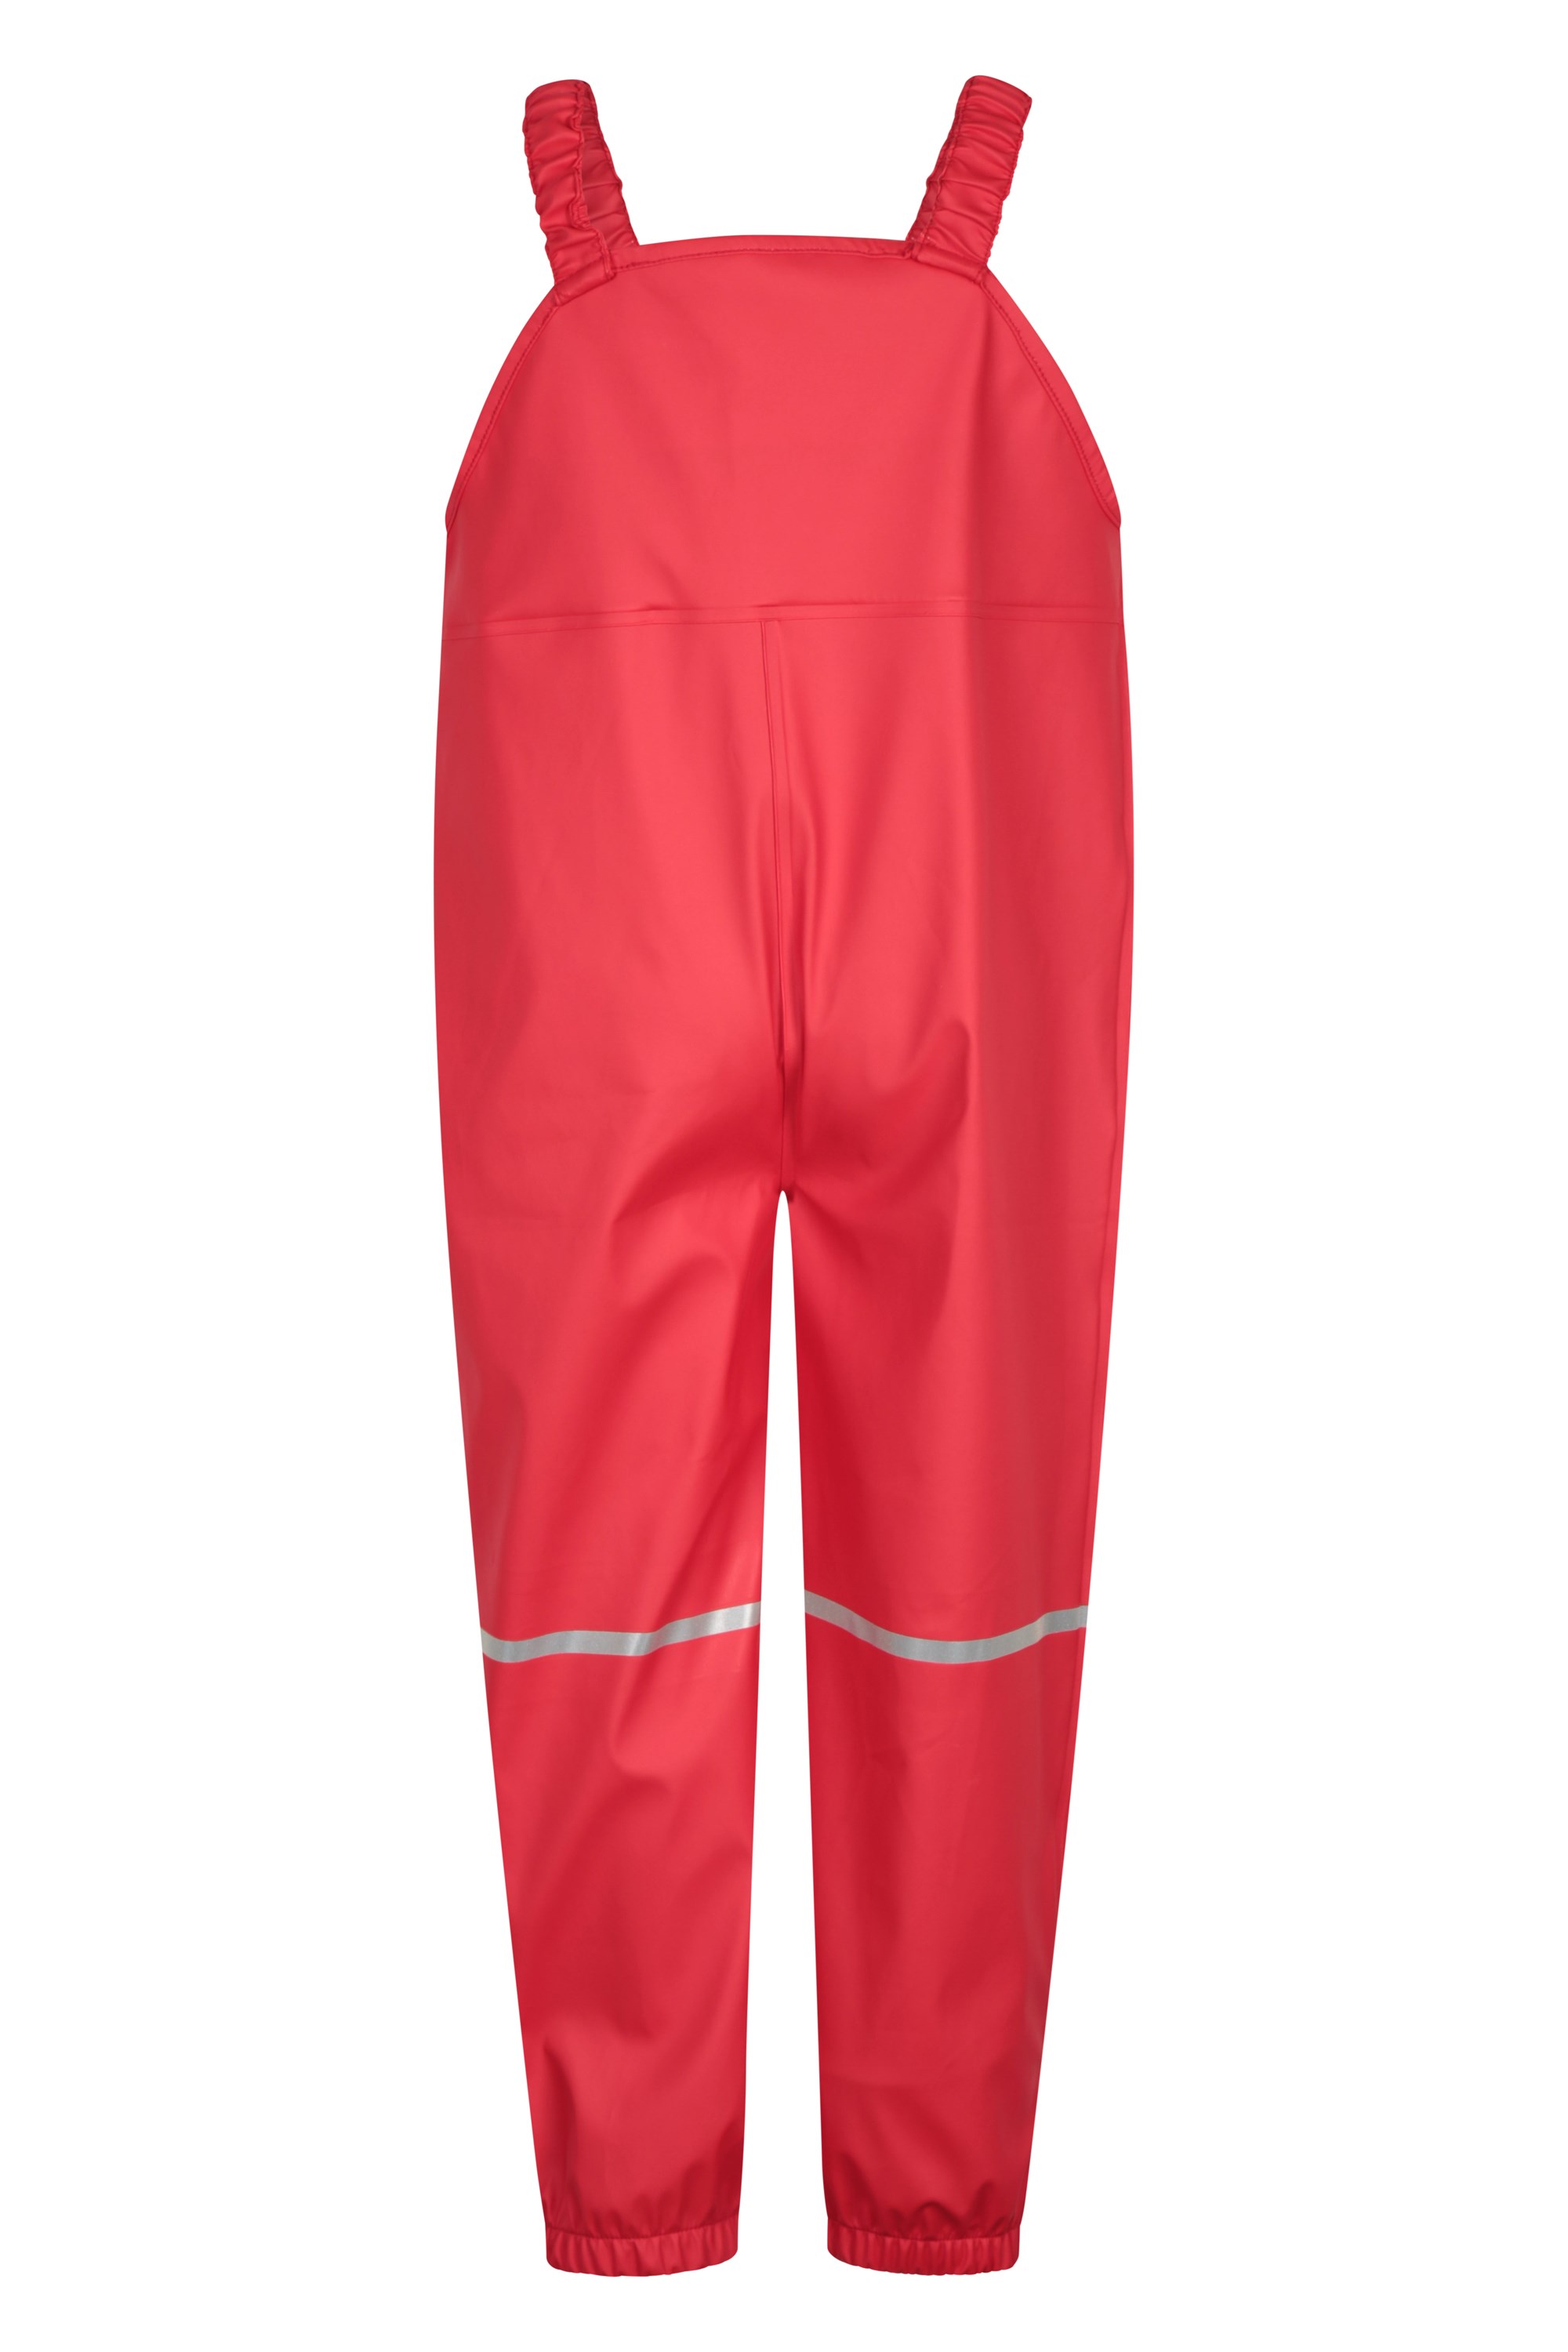 Waterproof shell trousers with braces - Light pink - Kids | H&M